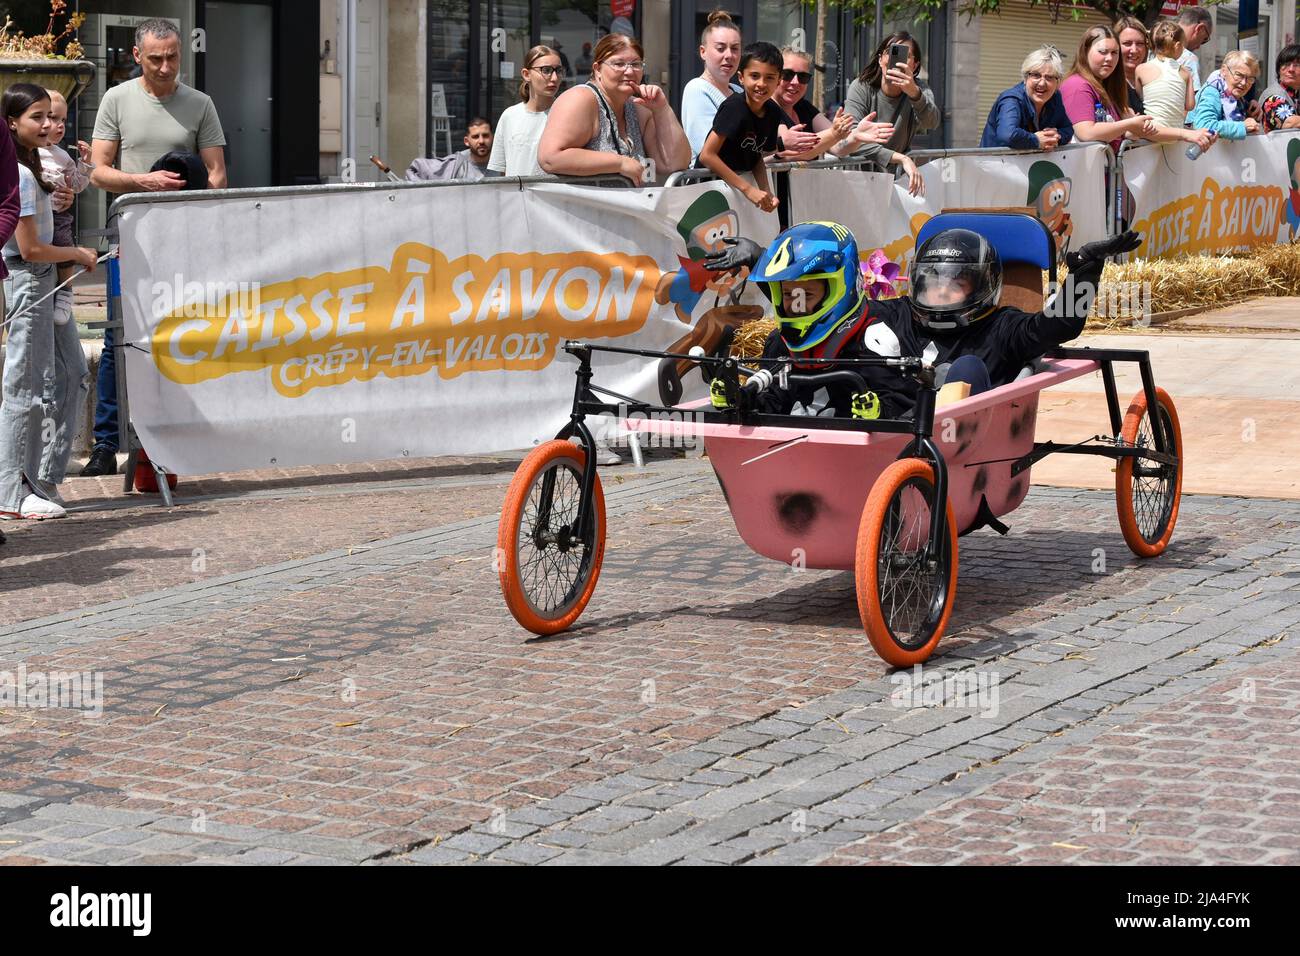 First edition of a soapbox race in the heart of the city center of Crépy-en-Valois. Homemade soap box hurtling down the slope of the main street. Stock Photo